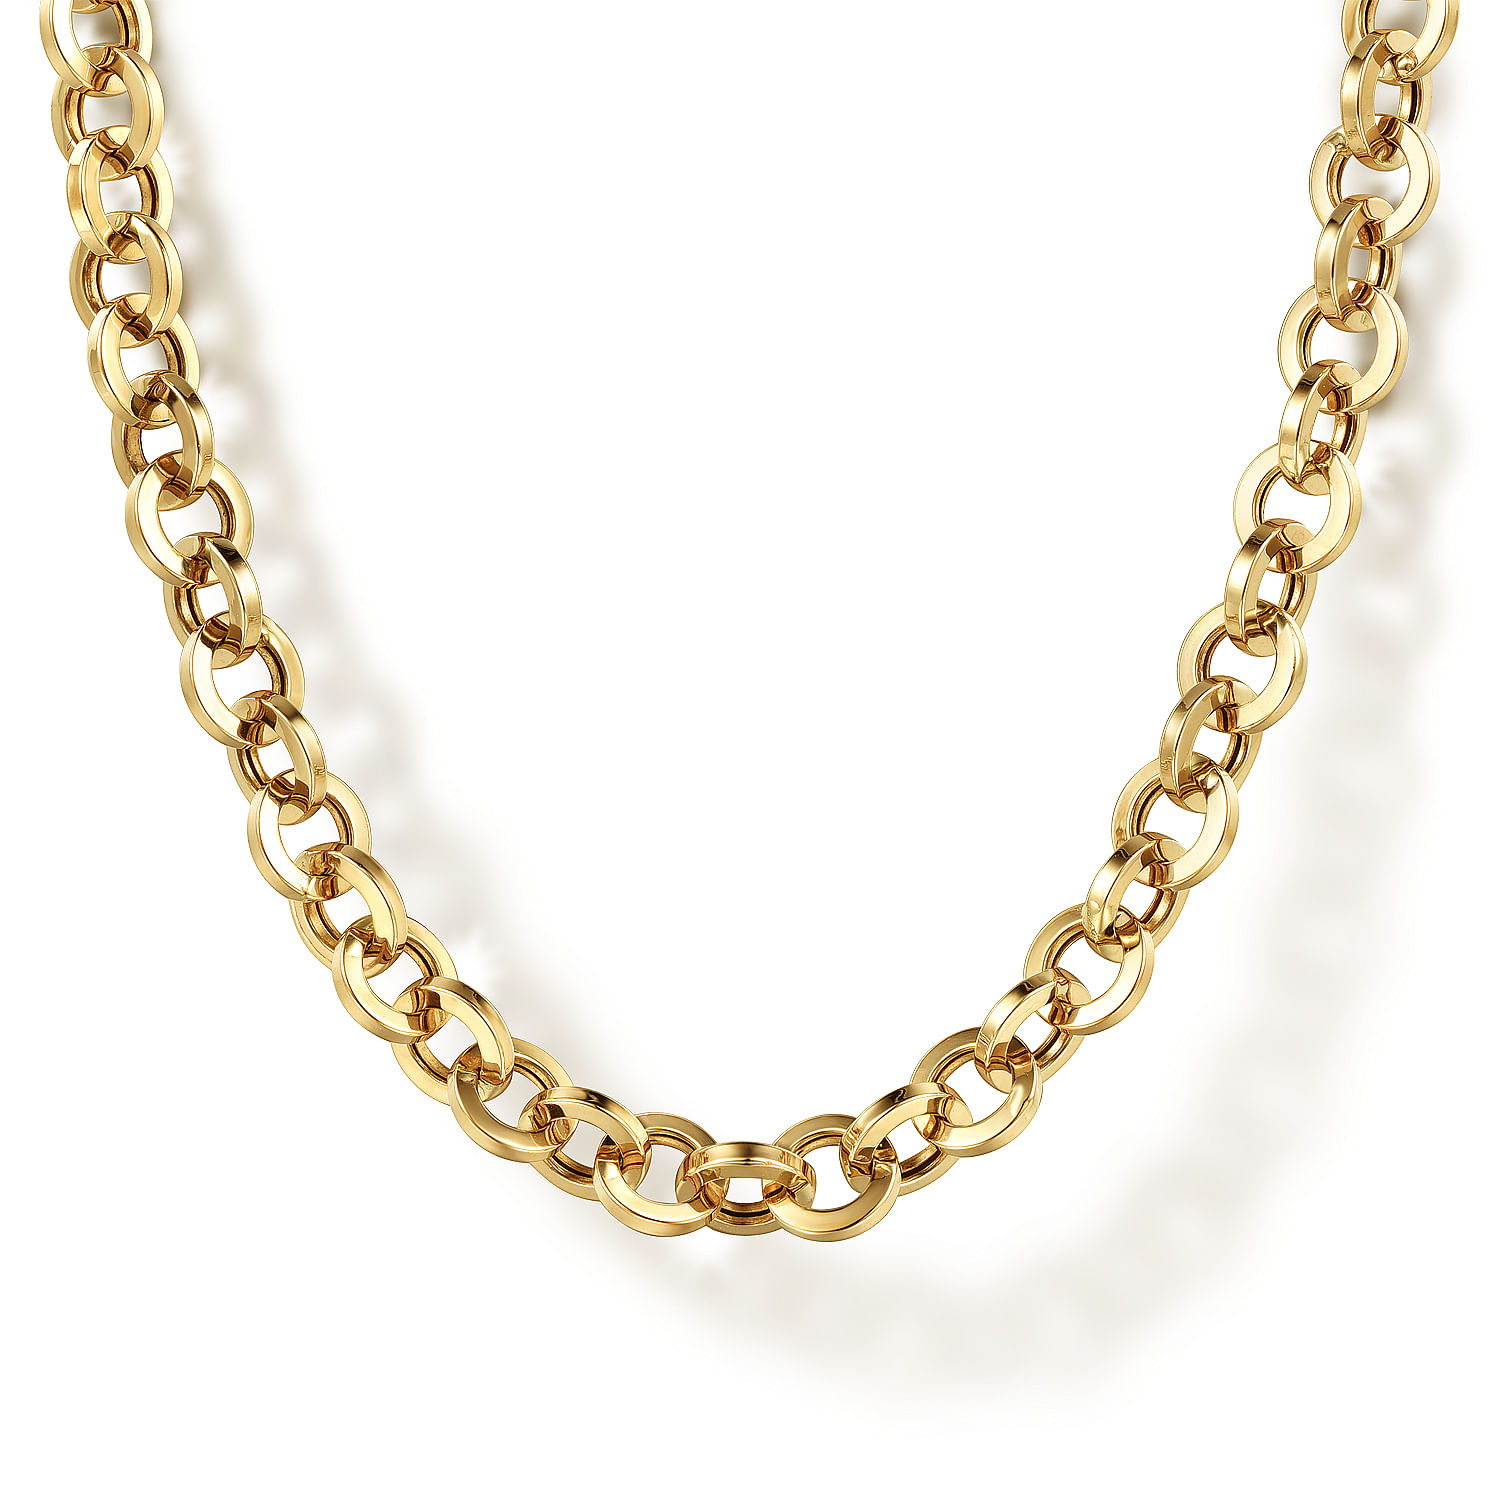 32 Inch 14K Yellow Gold Hollow Link Chain Necklace